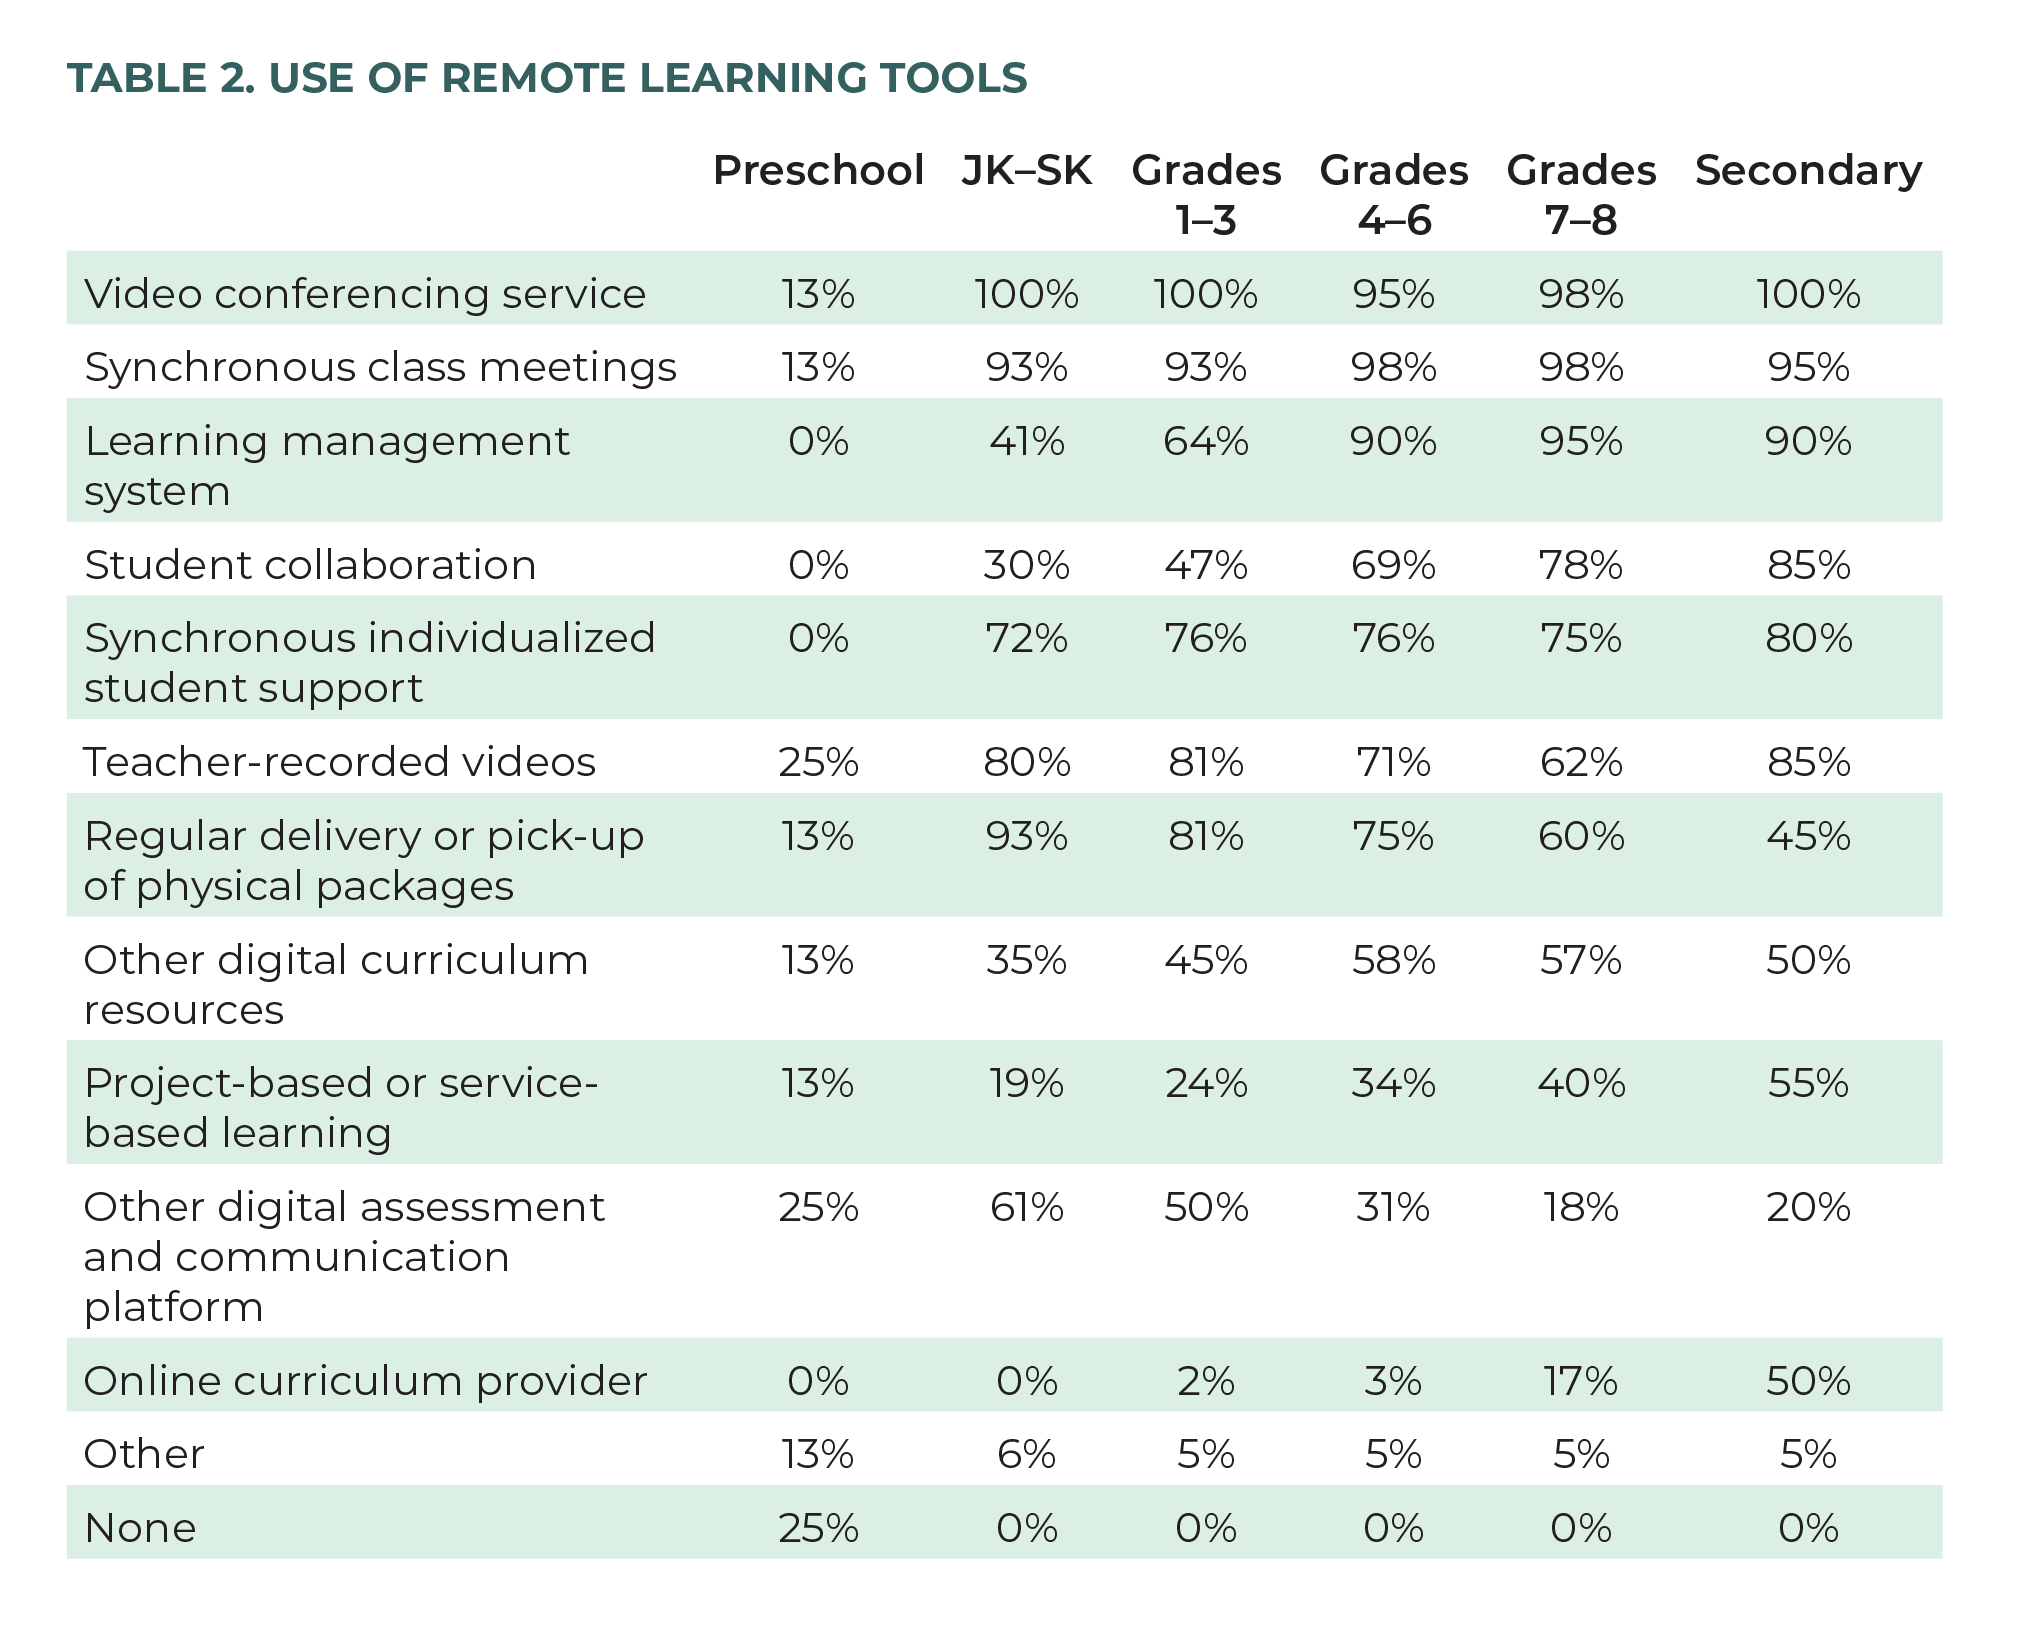 Table 2. Use of Remote Learning Tools.